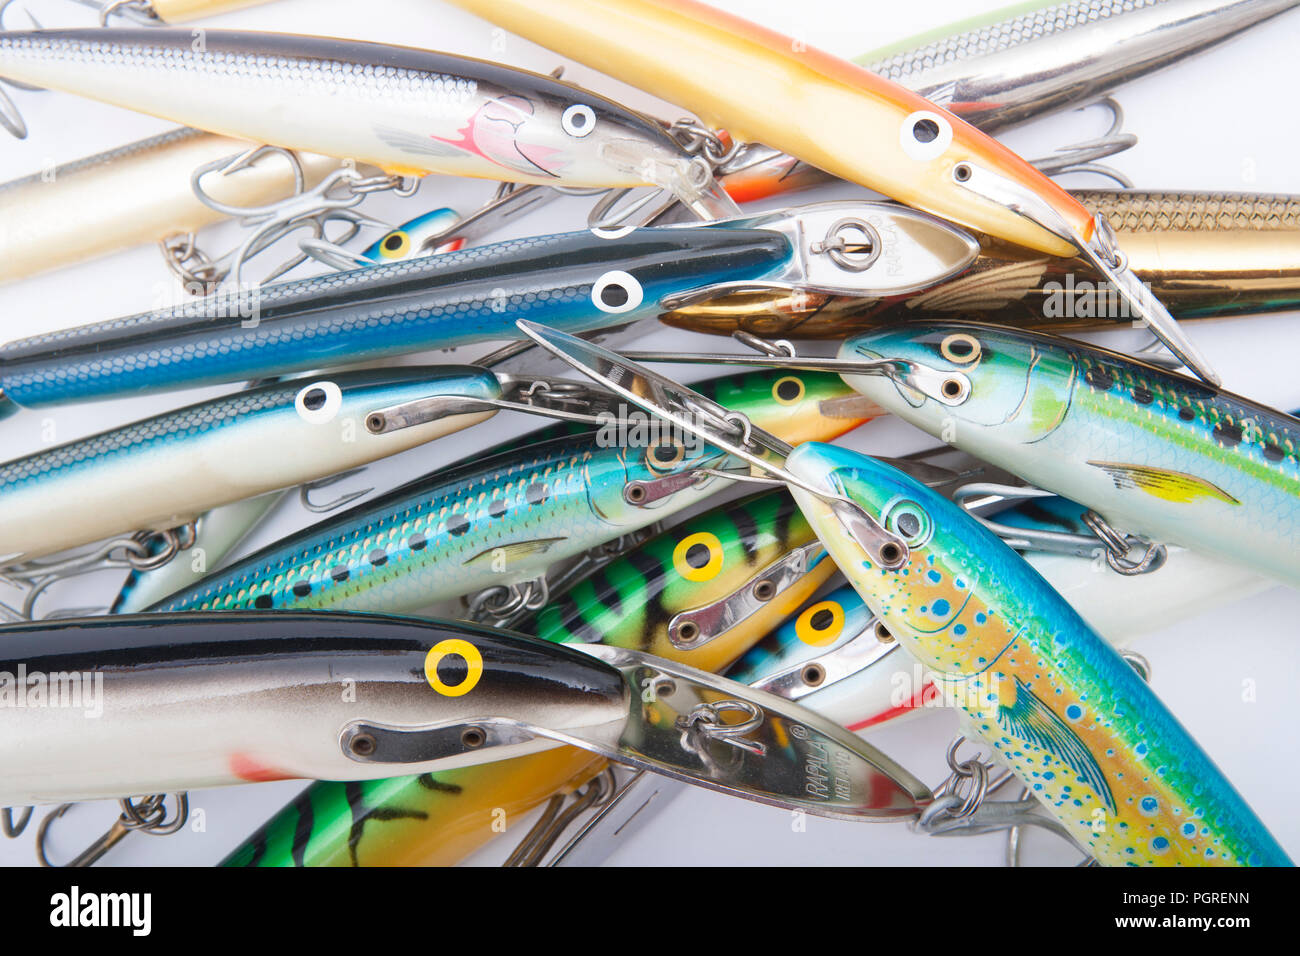 A selection of modern Rapala lures, or plugs, designed for catching large predatory fish. From a collection of vintage and modern fishing tackle. Nort Stock Photo